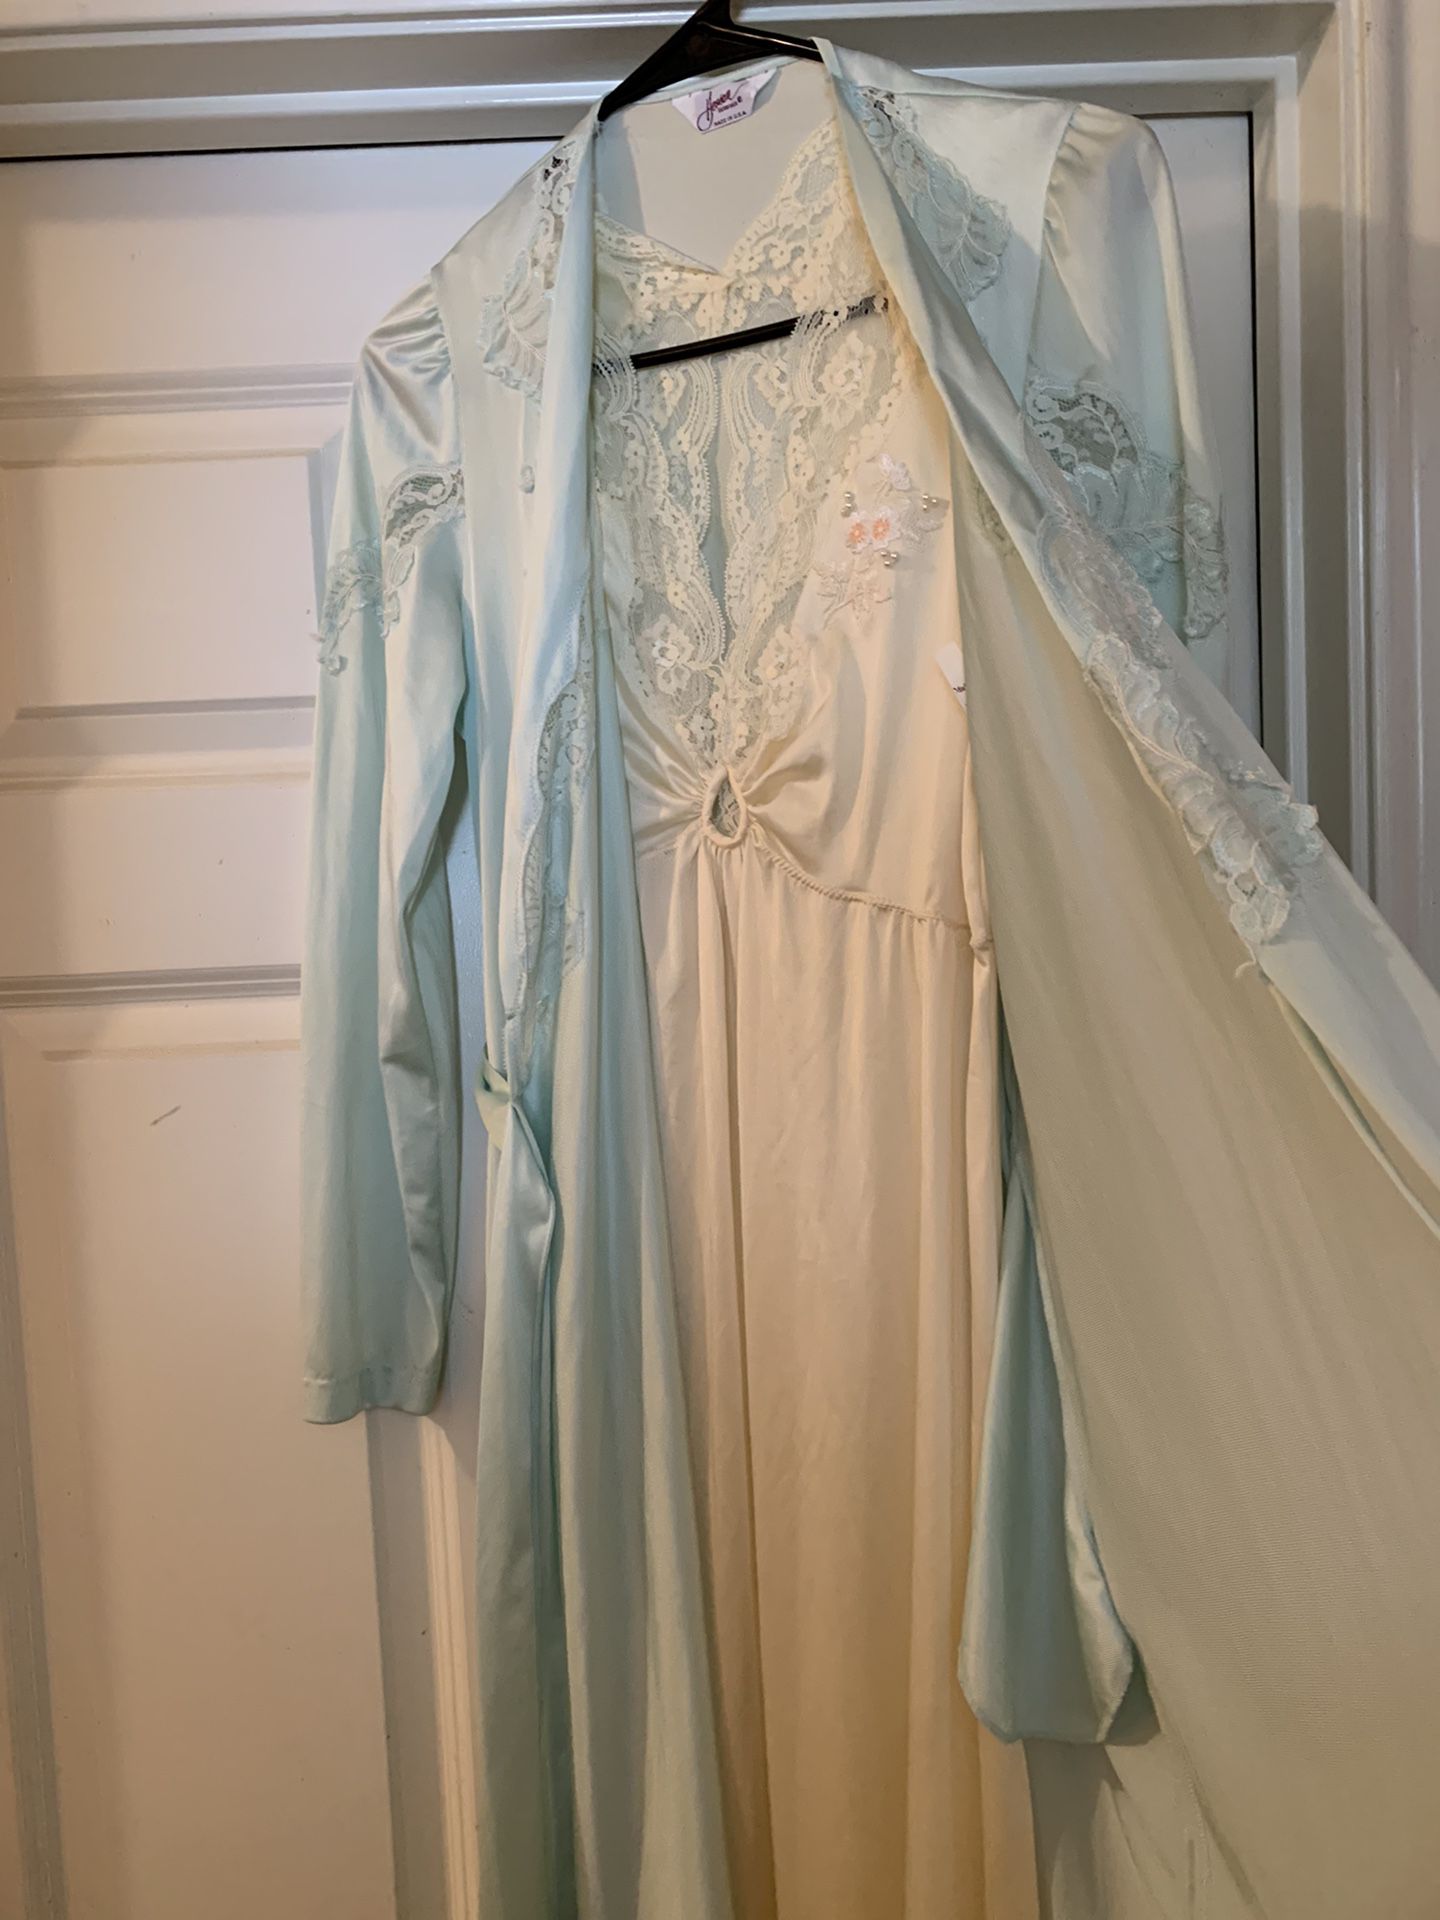 Peignoir Sets - Beautiful Gowns And Robes